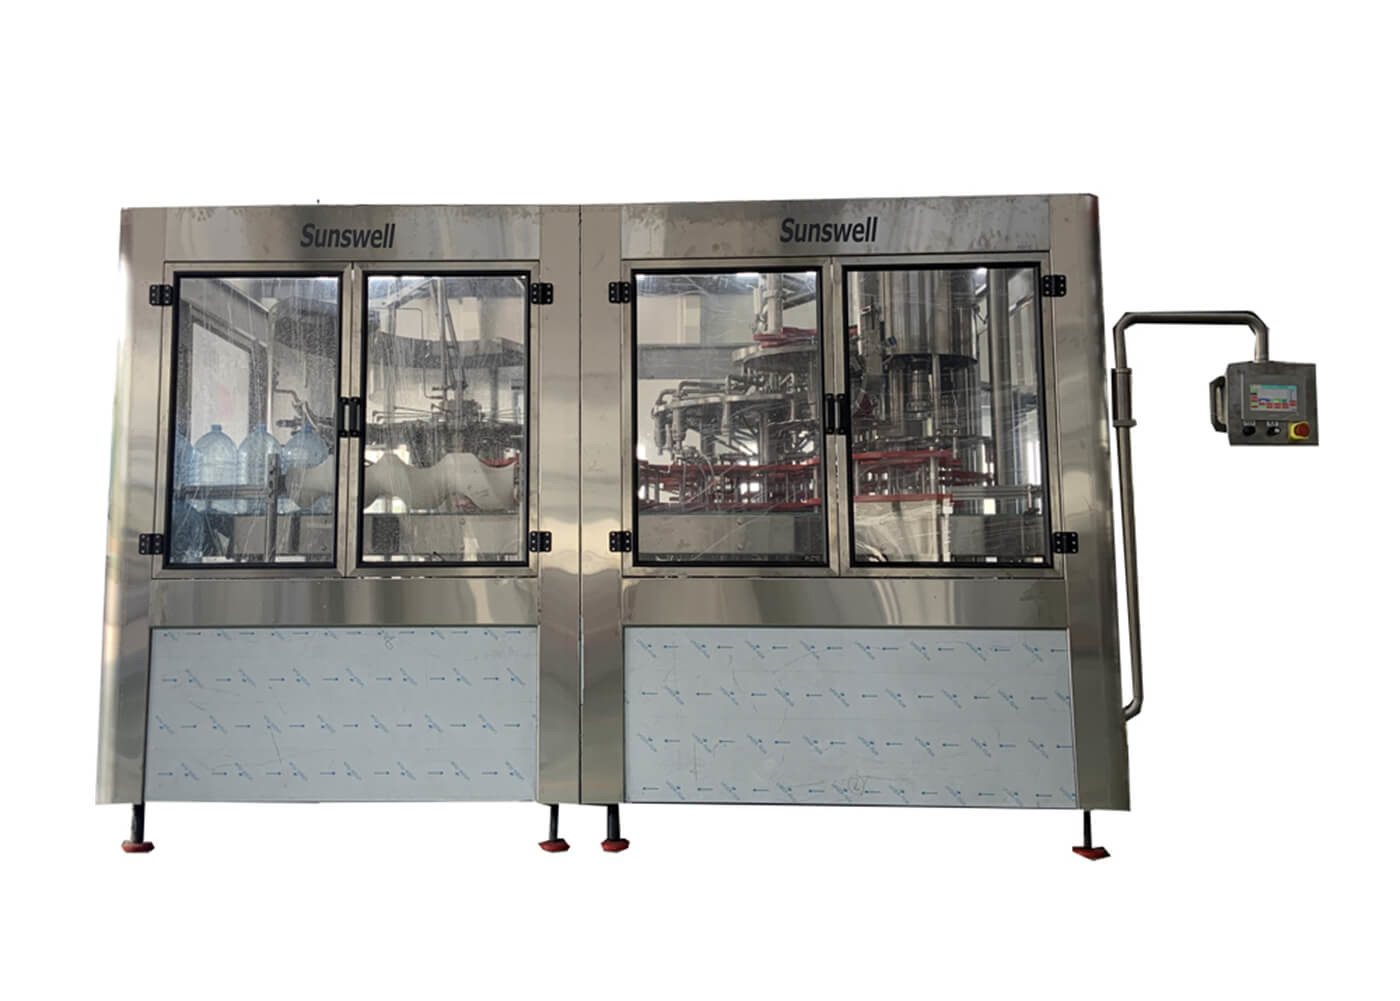 Water Jar Rinsing Filling Bottling And Capping Machine For Large Capacity